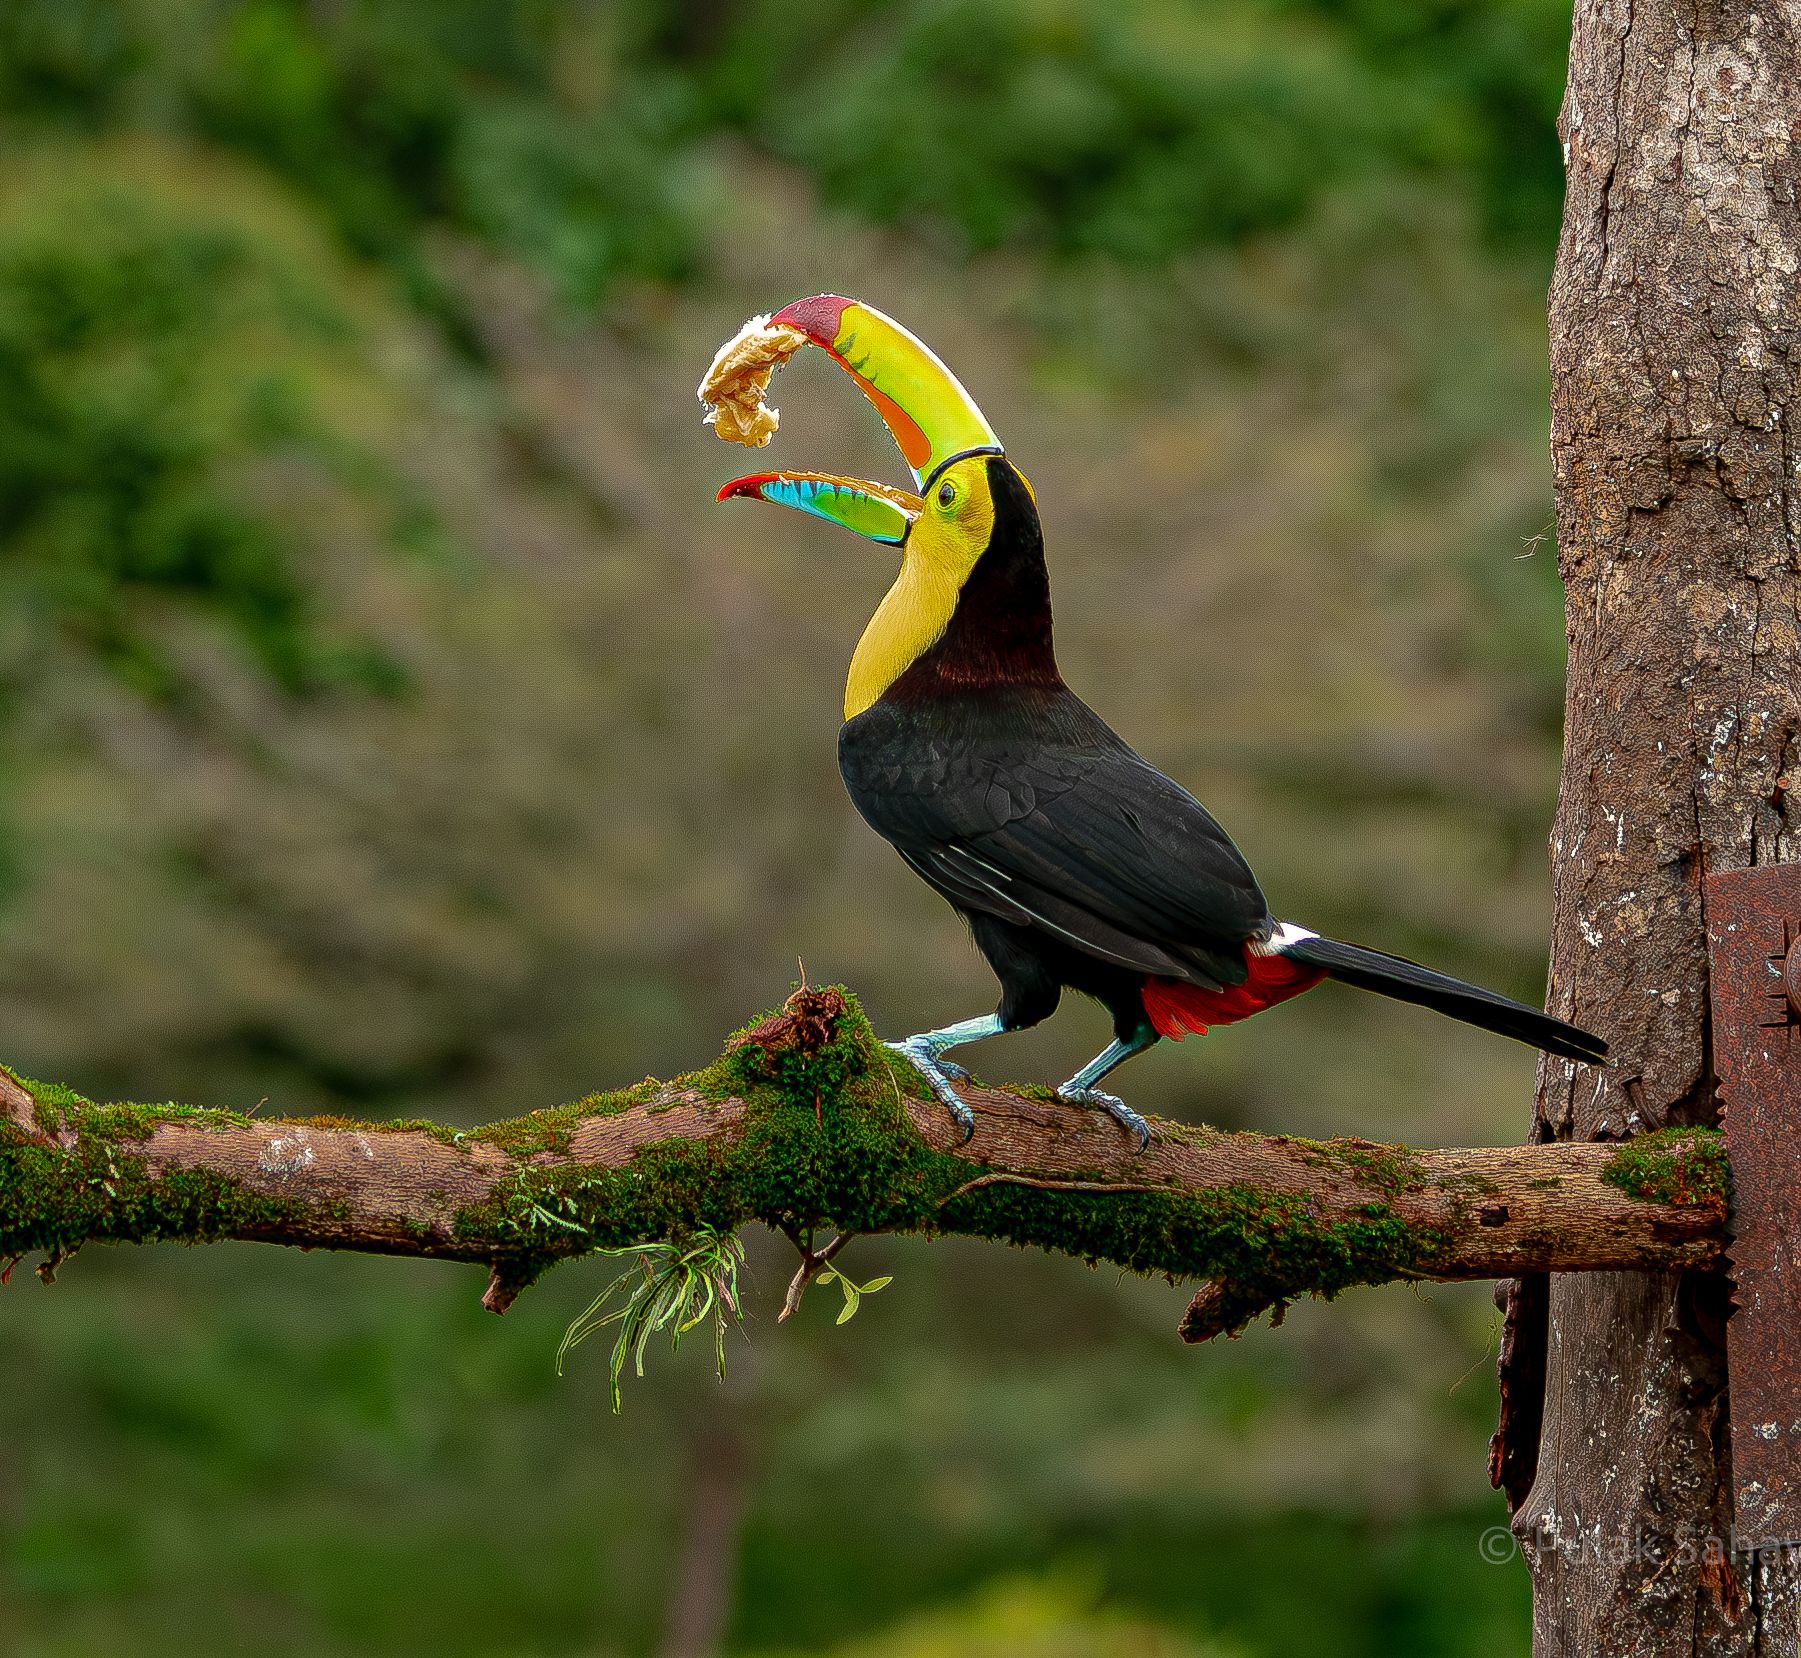 Toucan having a meal